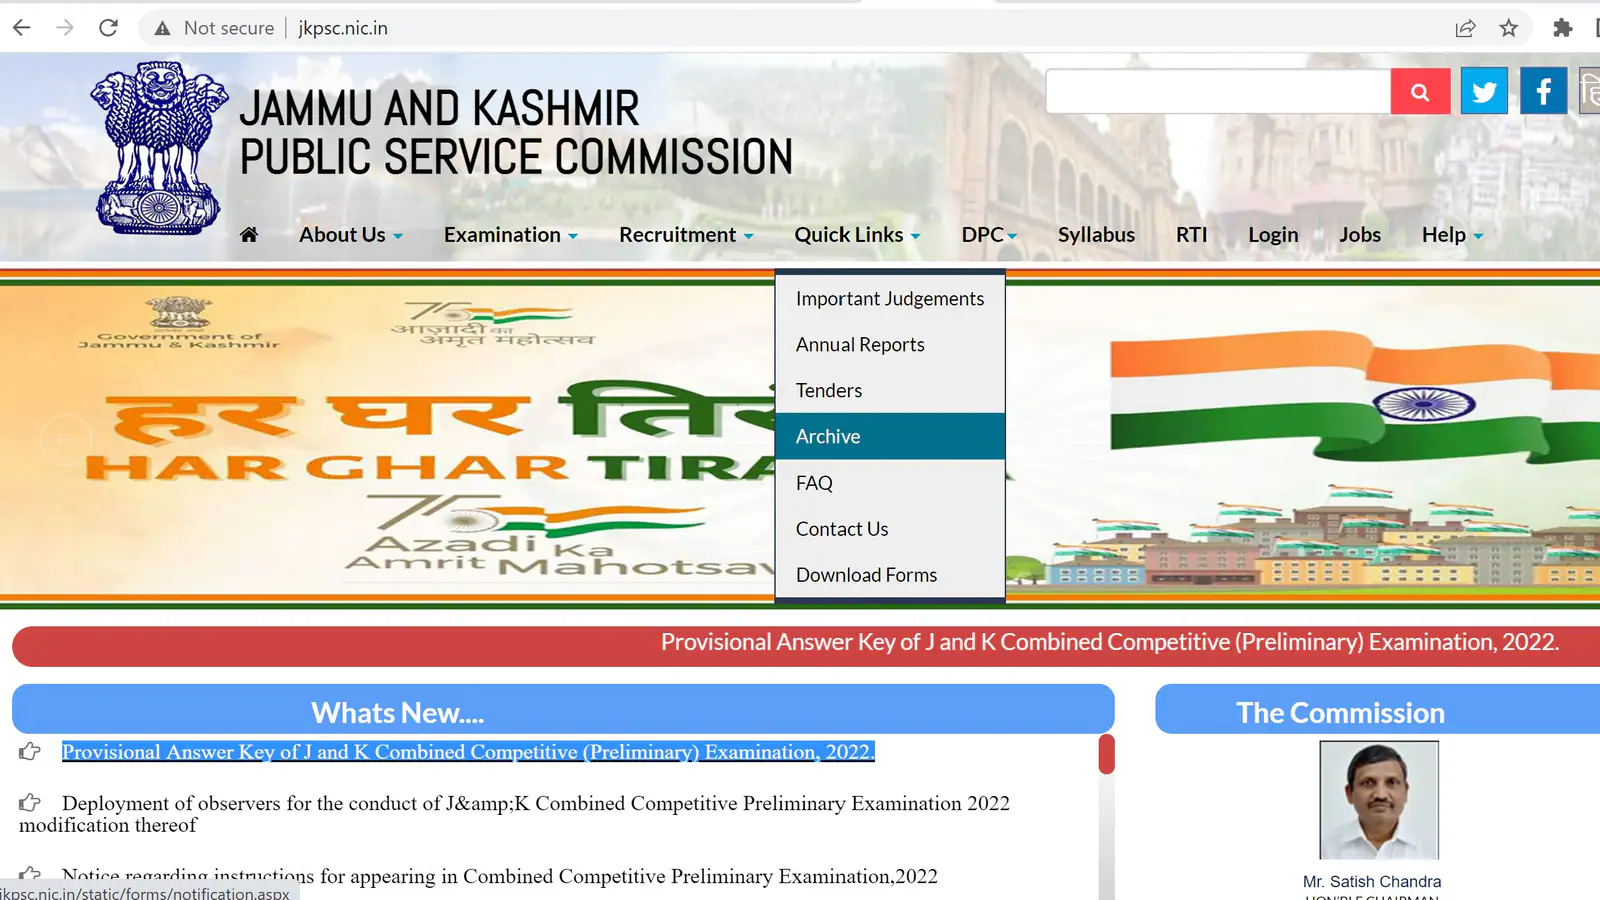 JKPSC CCE answer key released at jkpsc.nic.in, here's the direct link to check